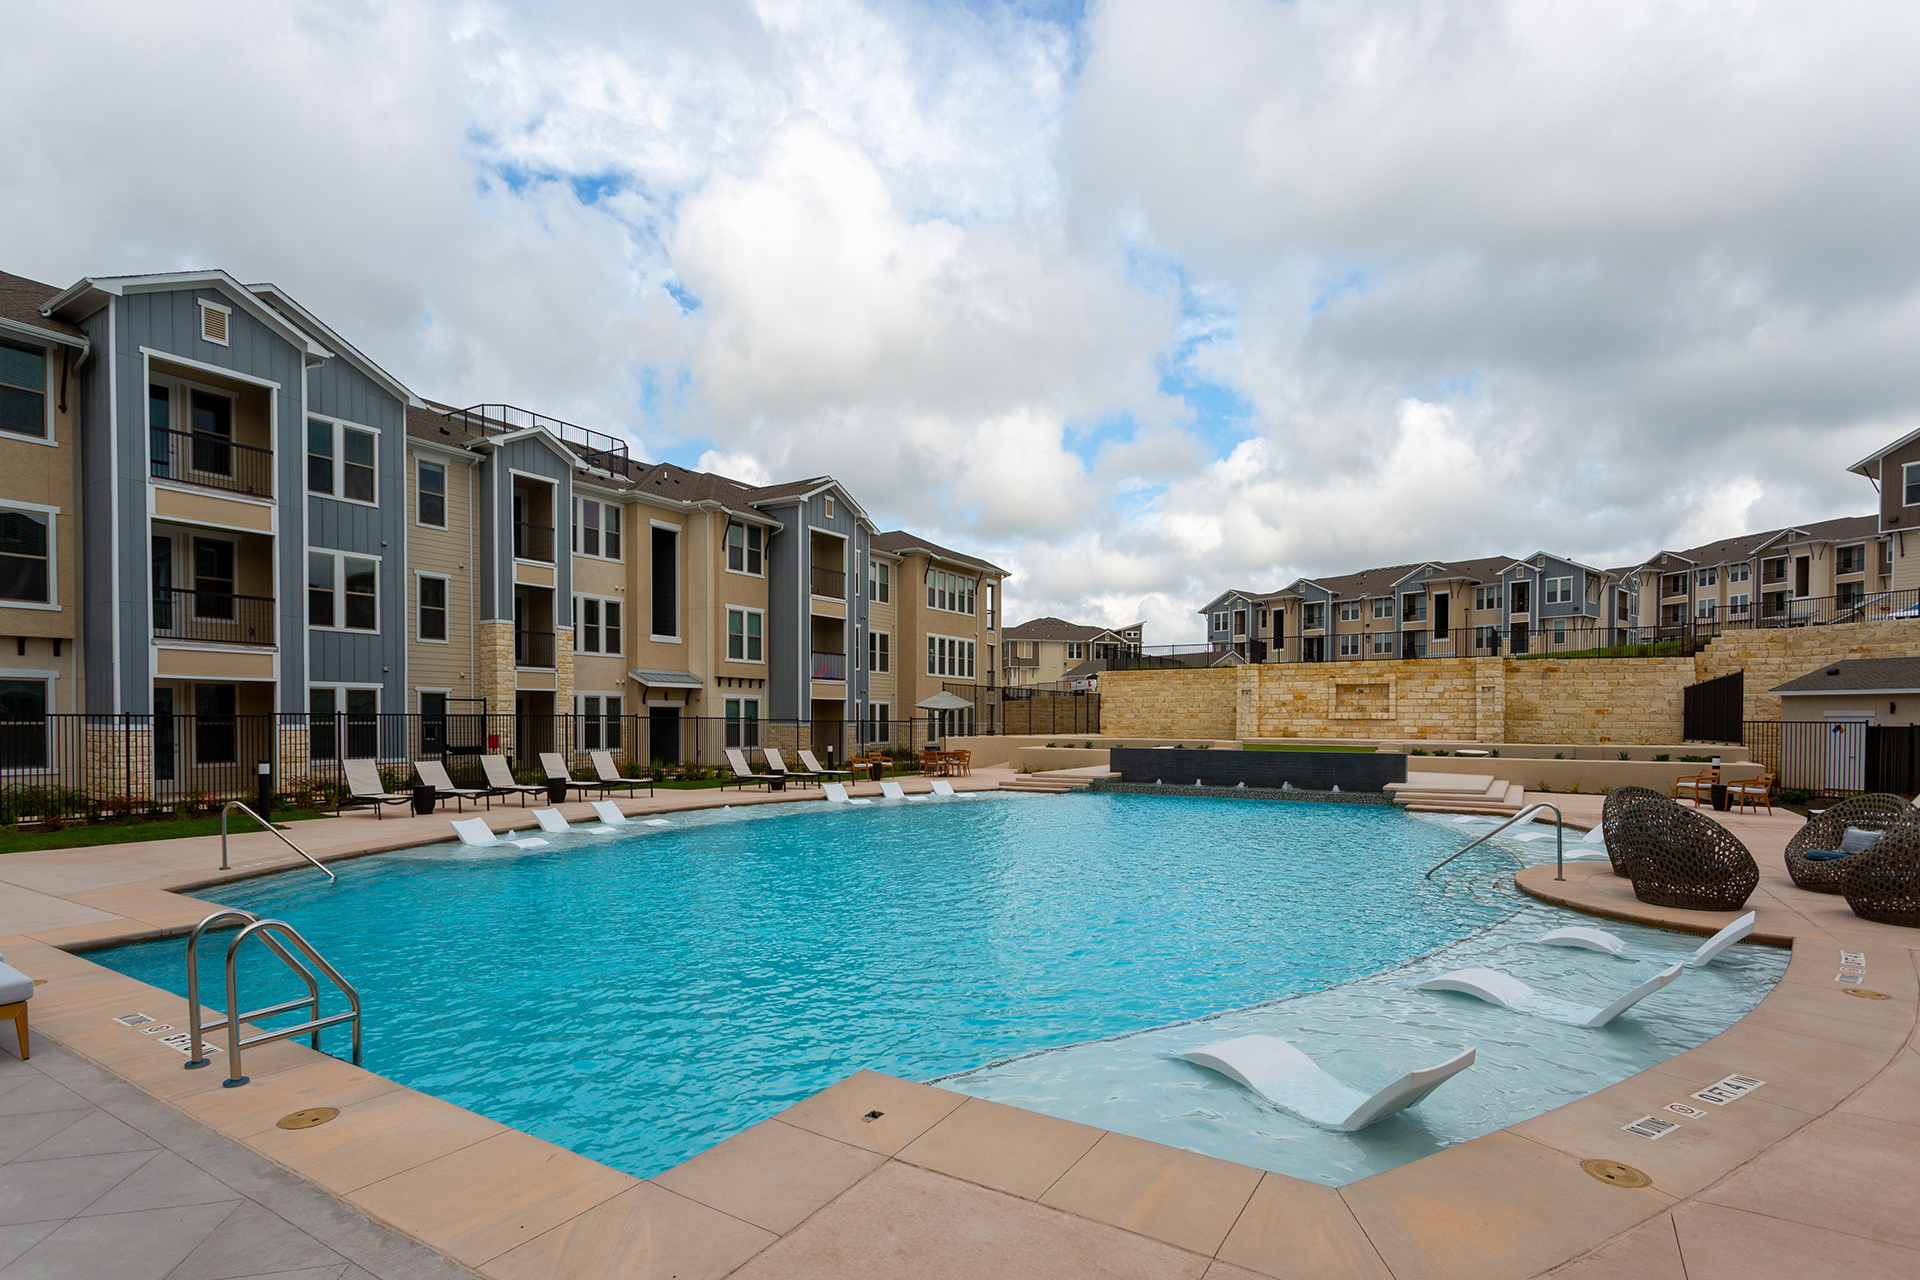 An outdoor swimming pool surrounded by lounge chairs and modern apartment buildings under a partly cloudy sky exemplifies prime multi-family real estate investments.